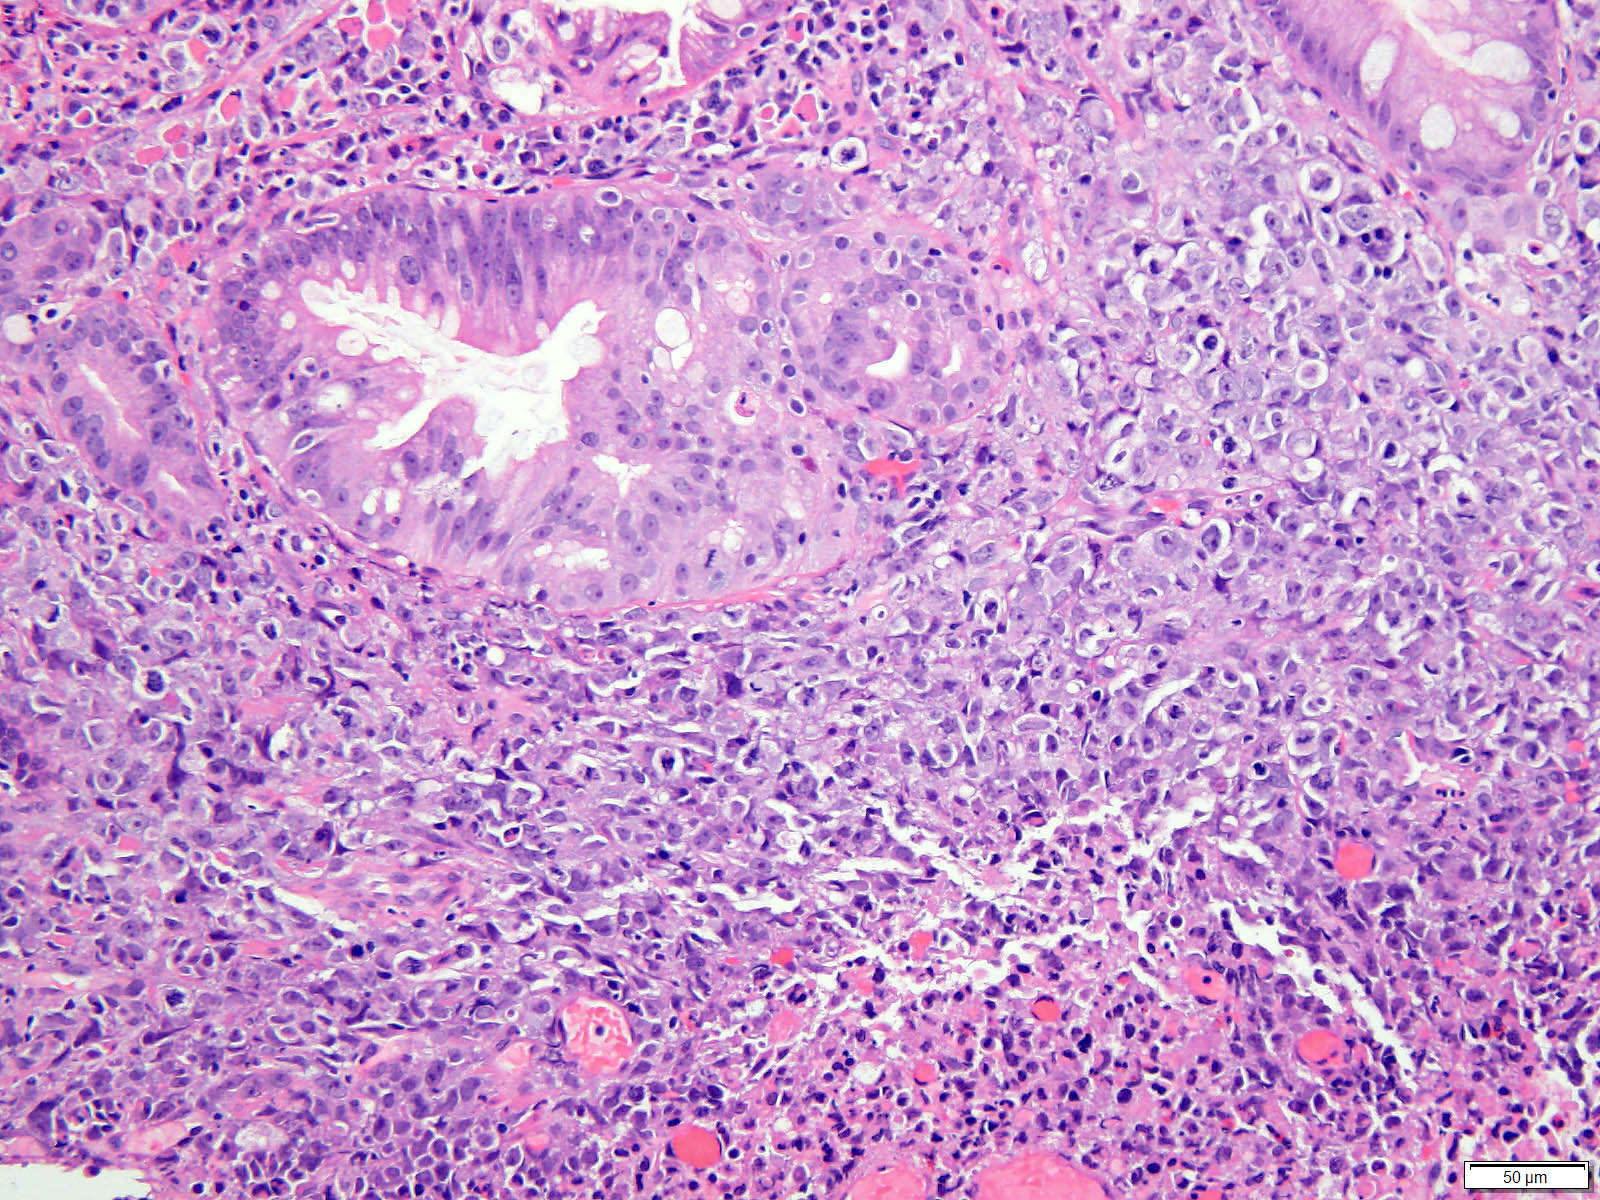 Esophageal Squamous Cell Carcinoma Histology